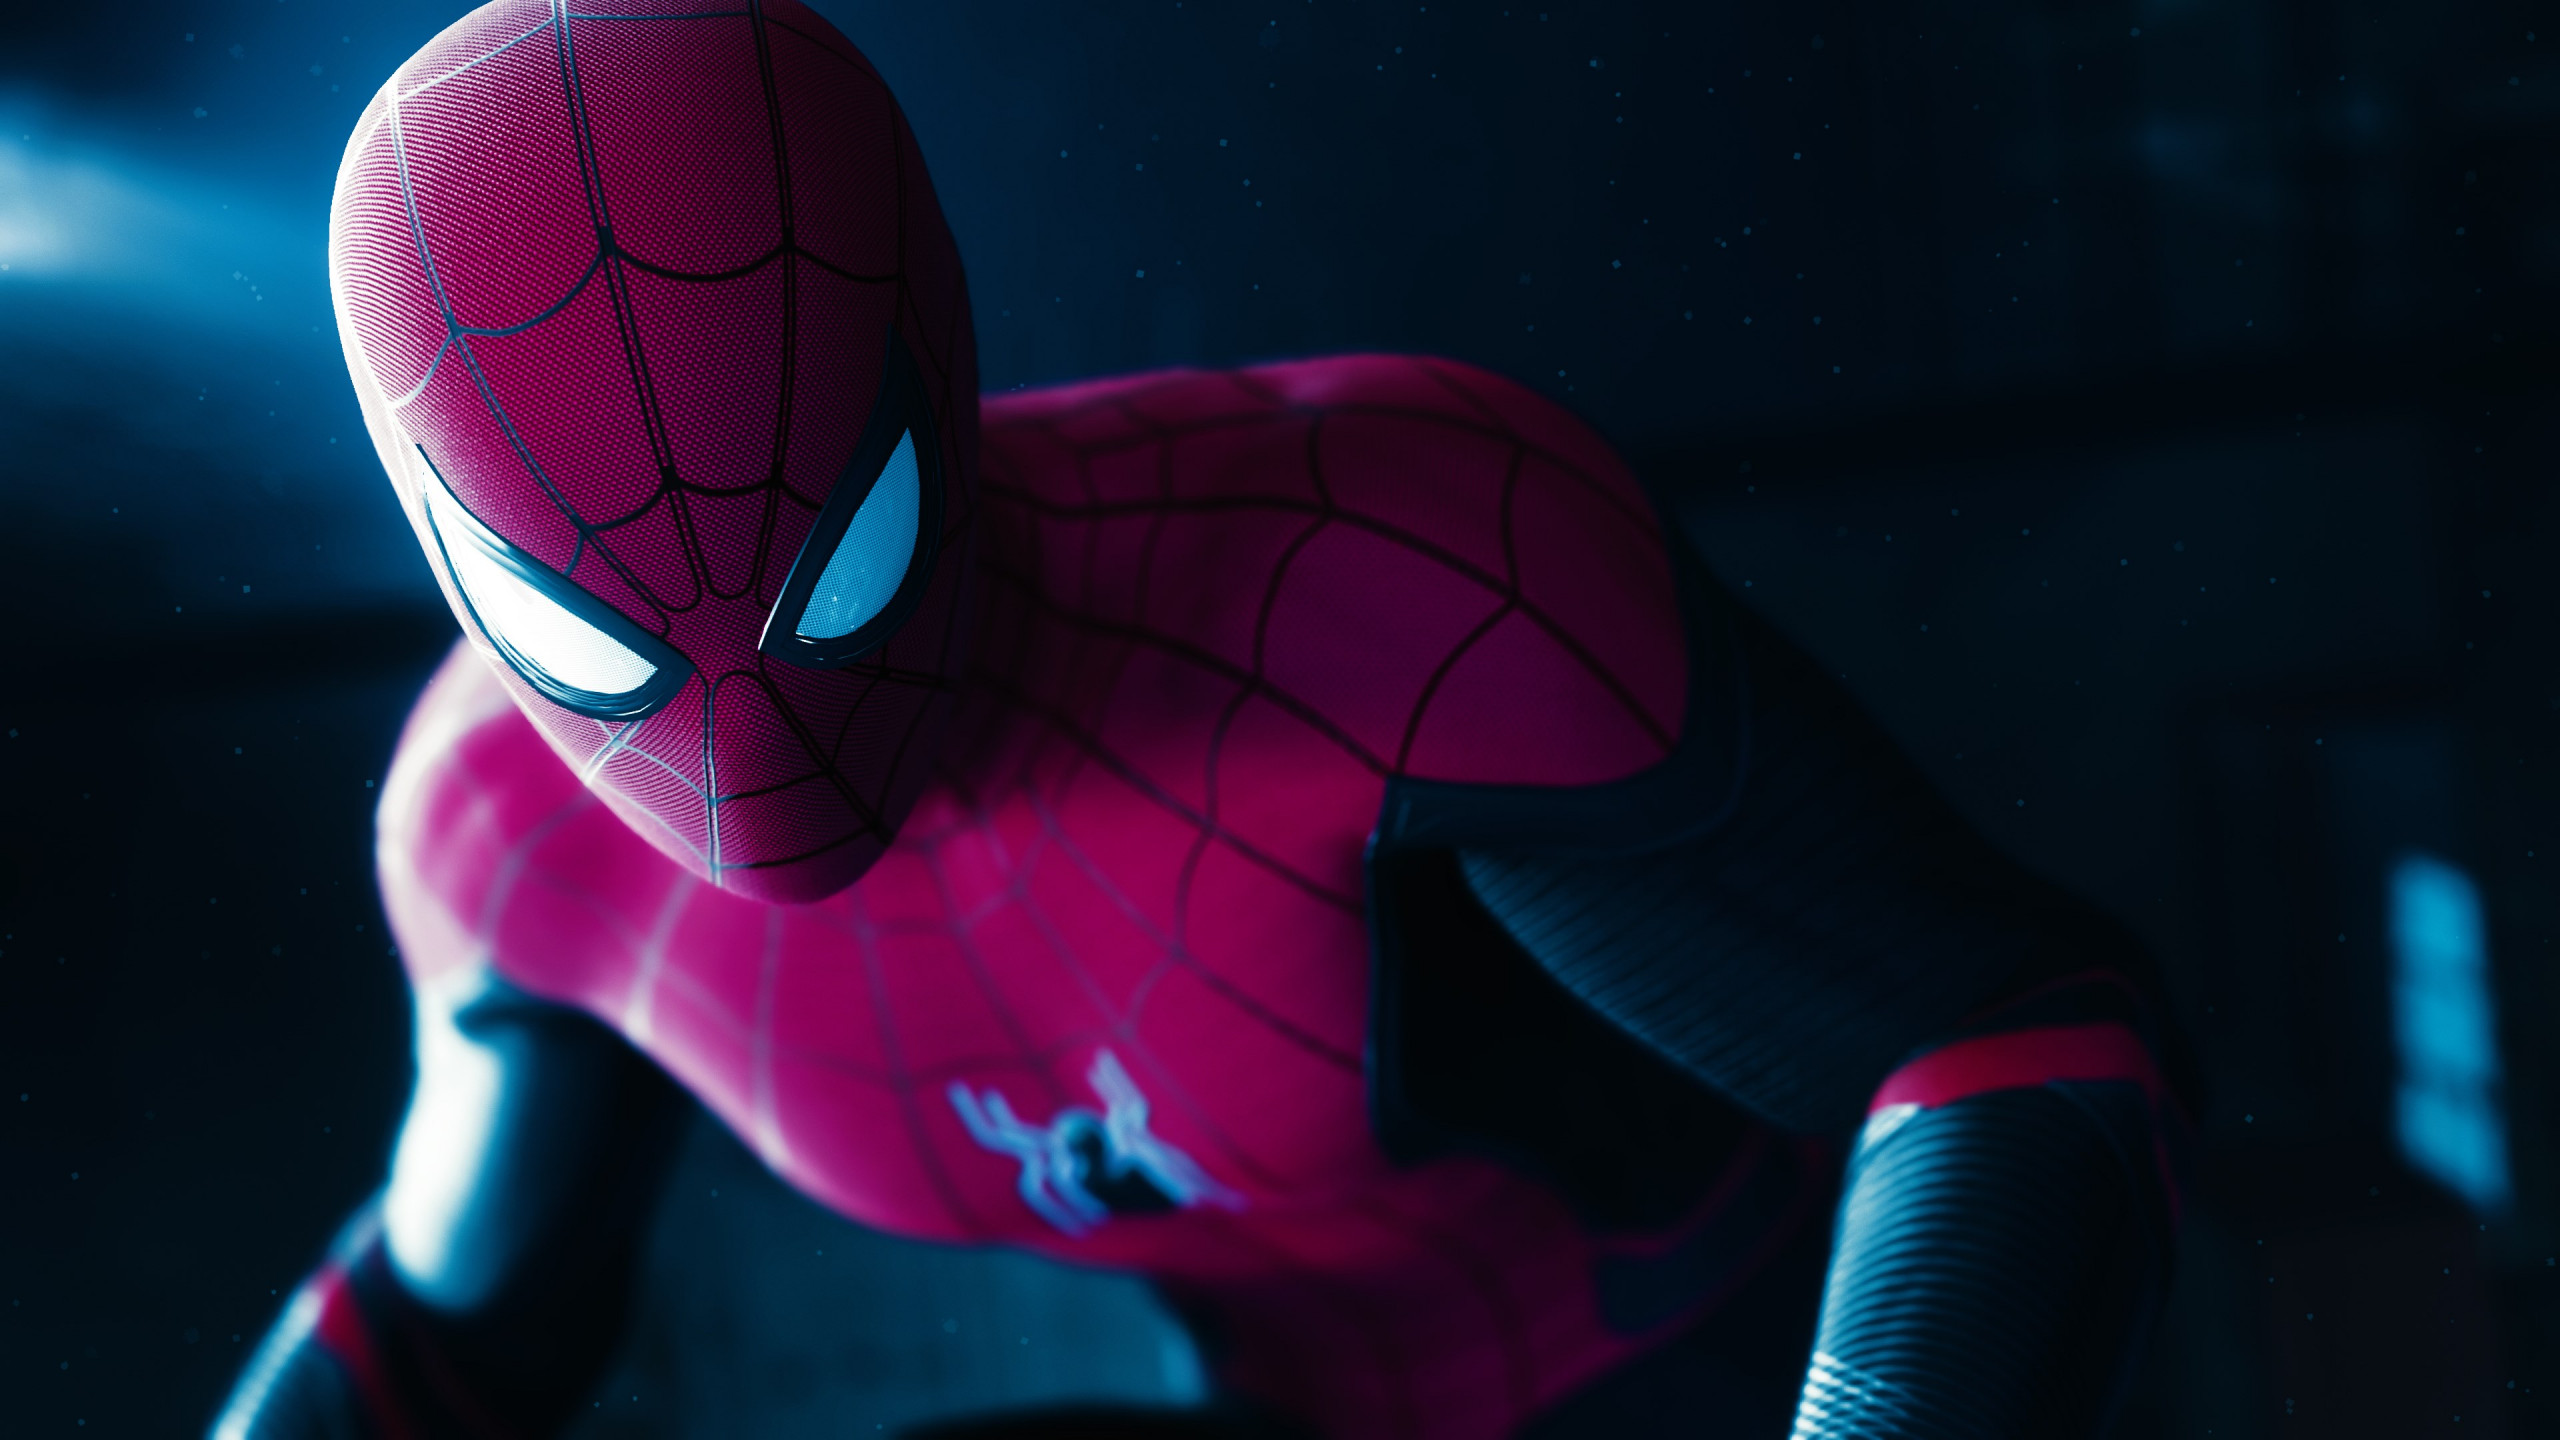 The Game: Spider man far from home wallpaper 2560x1440